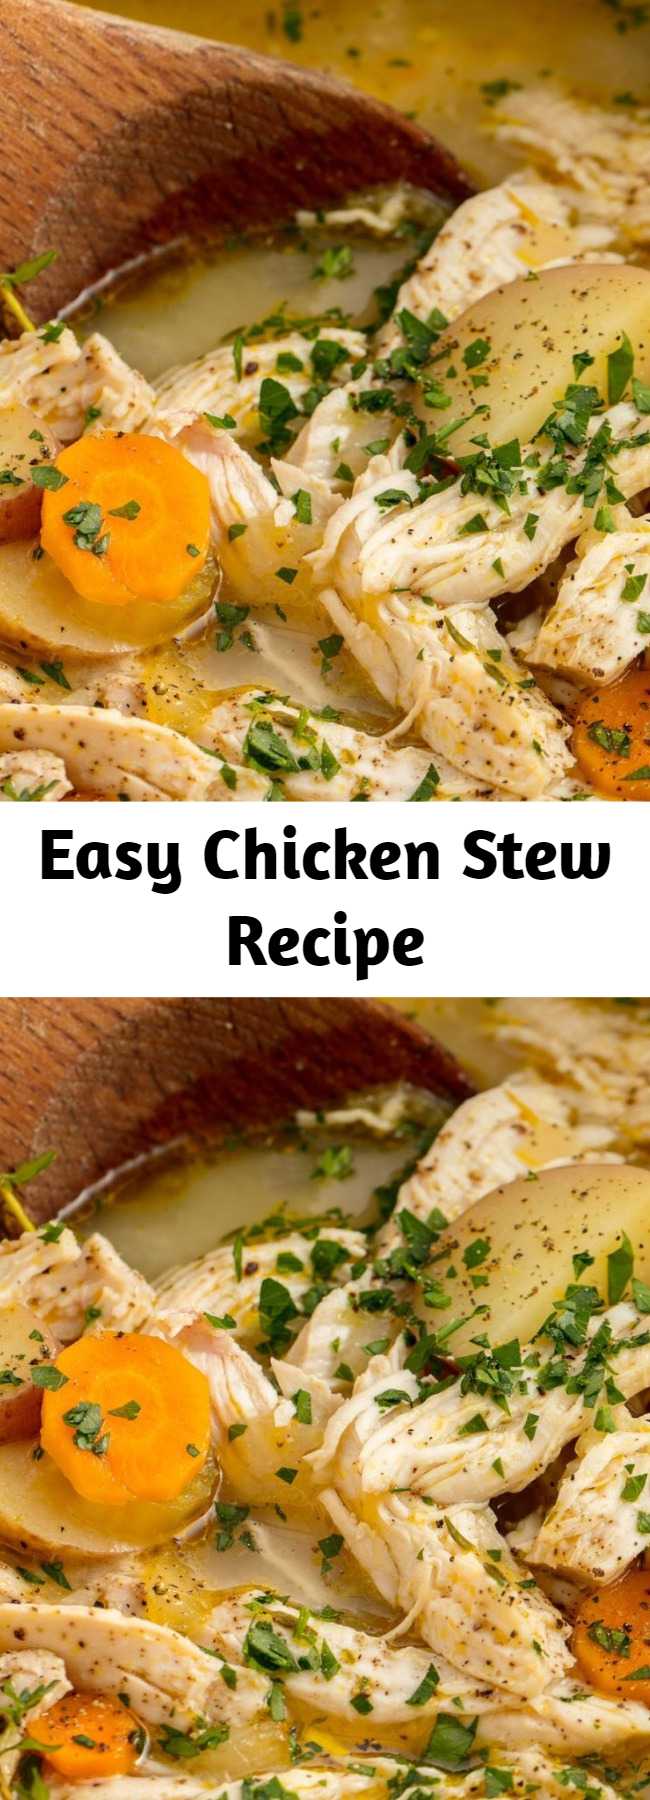 Easy Chicken Stew Recipe - Looking for a hearty, healthy dinner? This chicken stew takes under an hour, but it tastes like it's been simmering on the stove for hours.  It has all of the comfort and none of the work. #recipe #easy #easyrecipes #chicken #stew #soup #comfort #food #comfortfood #carrots #potatoes #winter